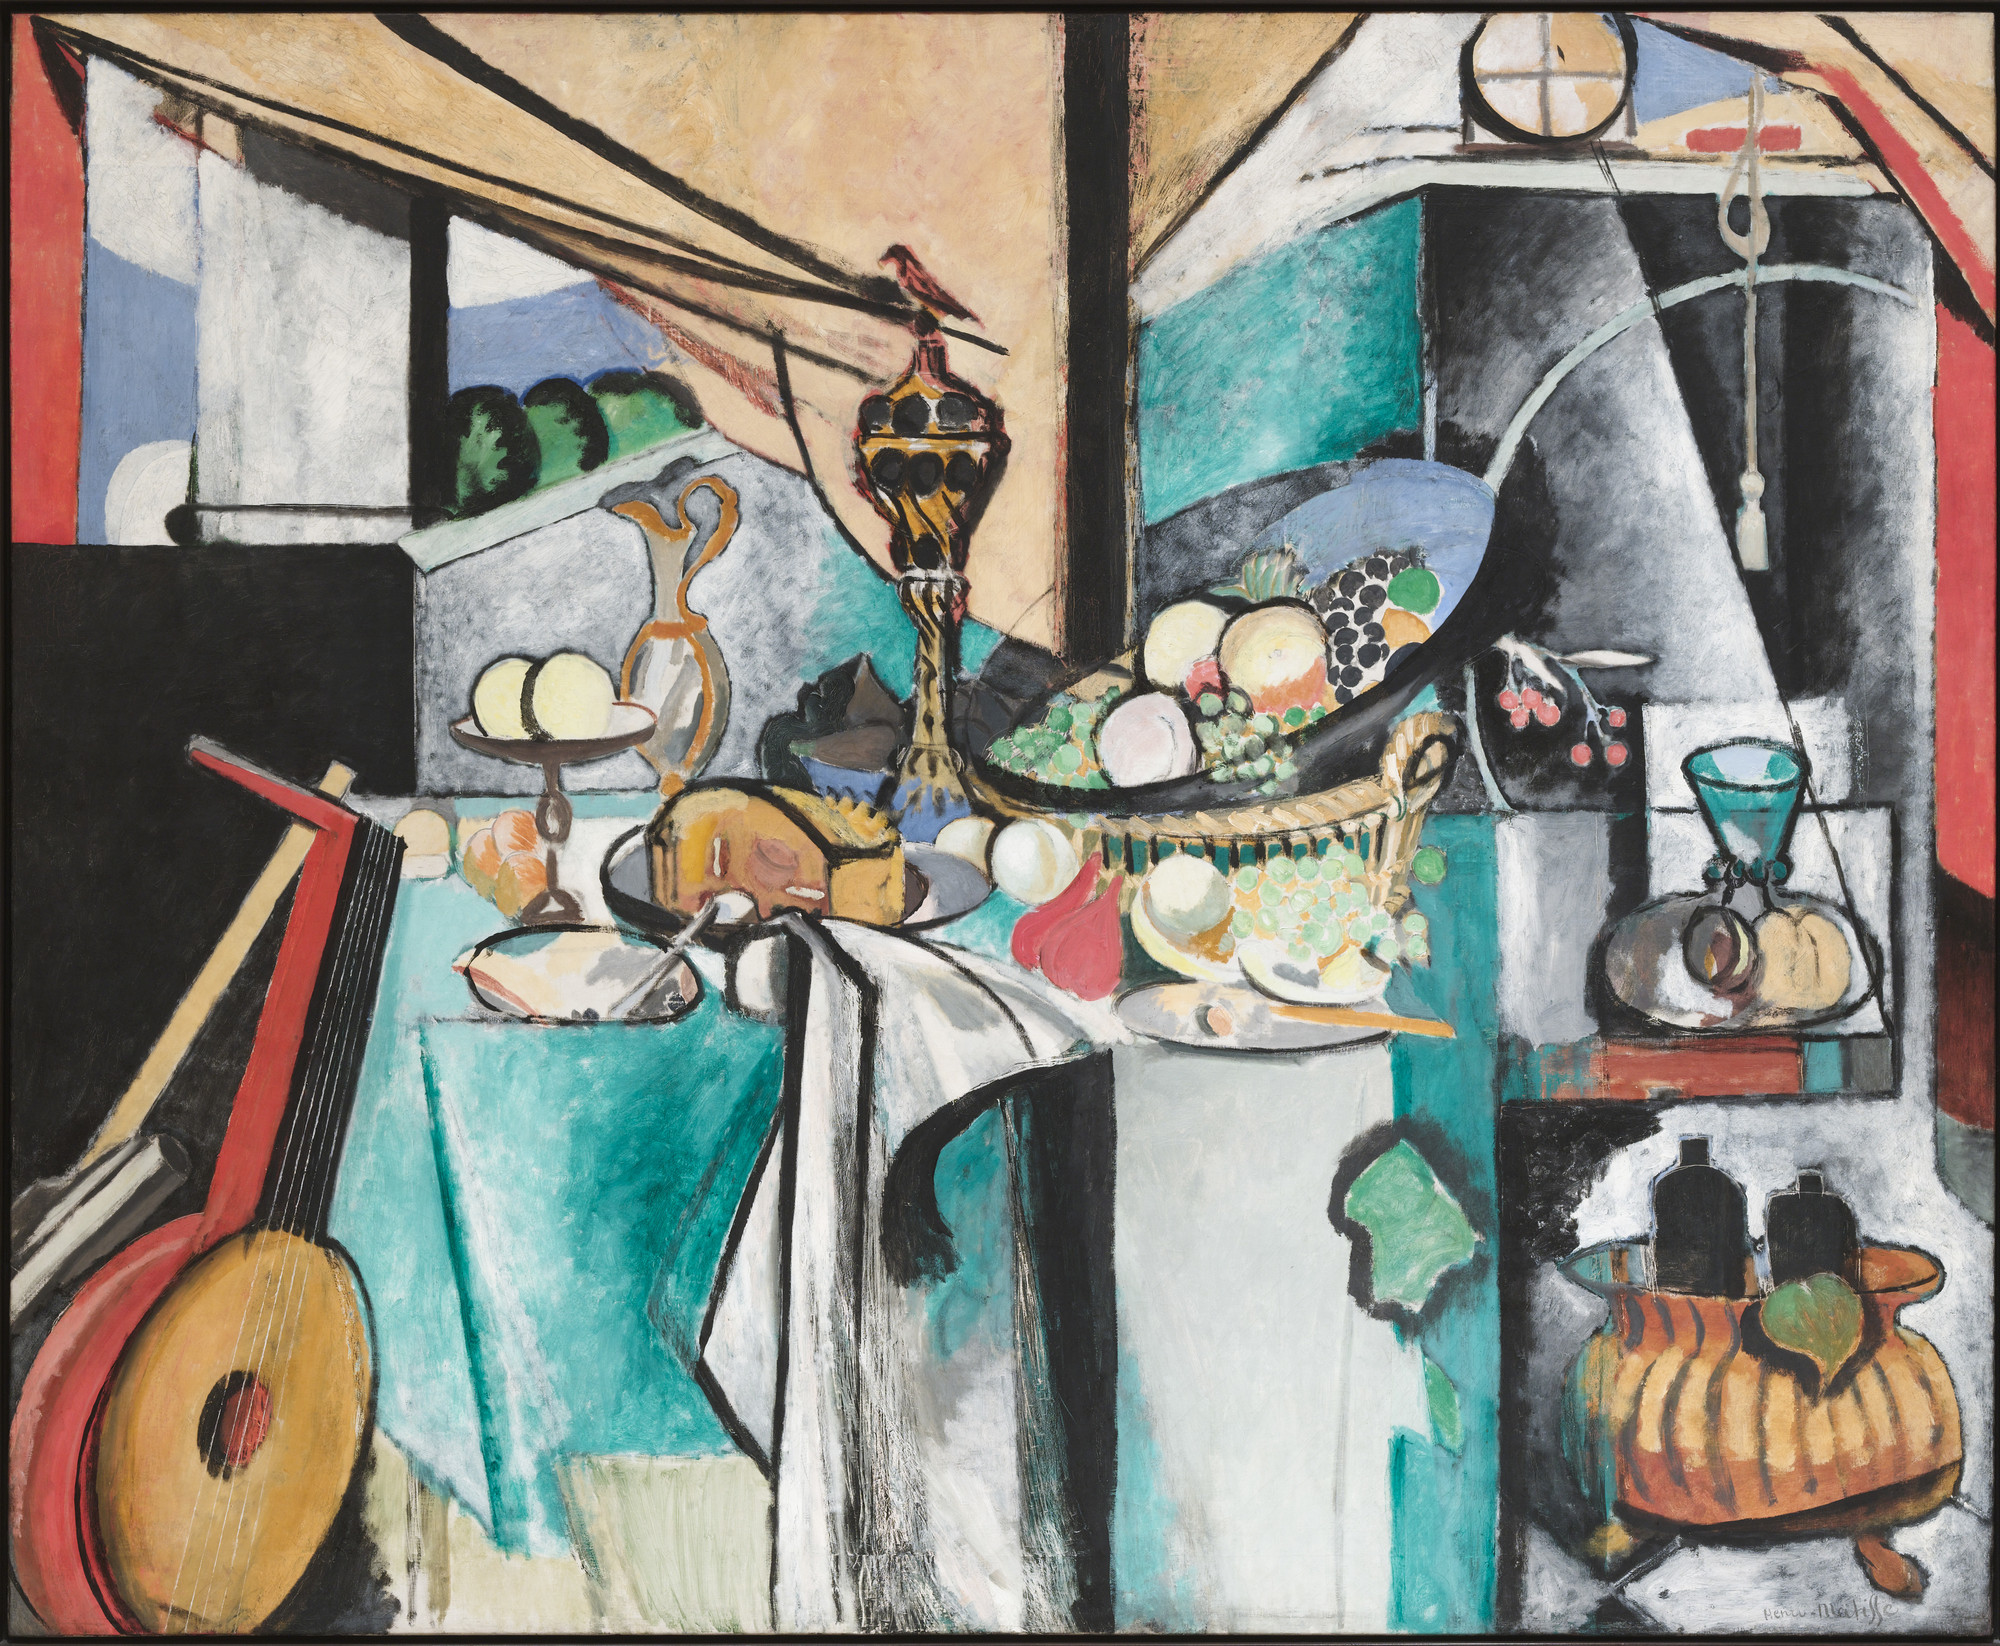 Oil on canvas. 71 1/4" x 7' 3" (180.9 x 220.8 cm)  
 The Museum of Modern Art, New York. Gift and bequest of Florene M. Schoenborn and Samuel A. Marx, 1964  
 © 2010 Succession H. Matisse / Artists Rights Society (ARS), New York.